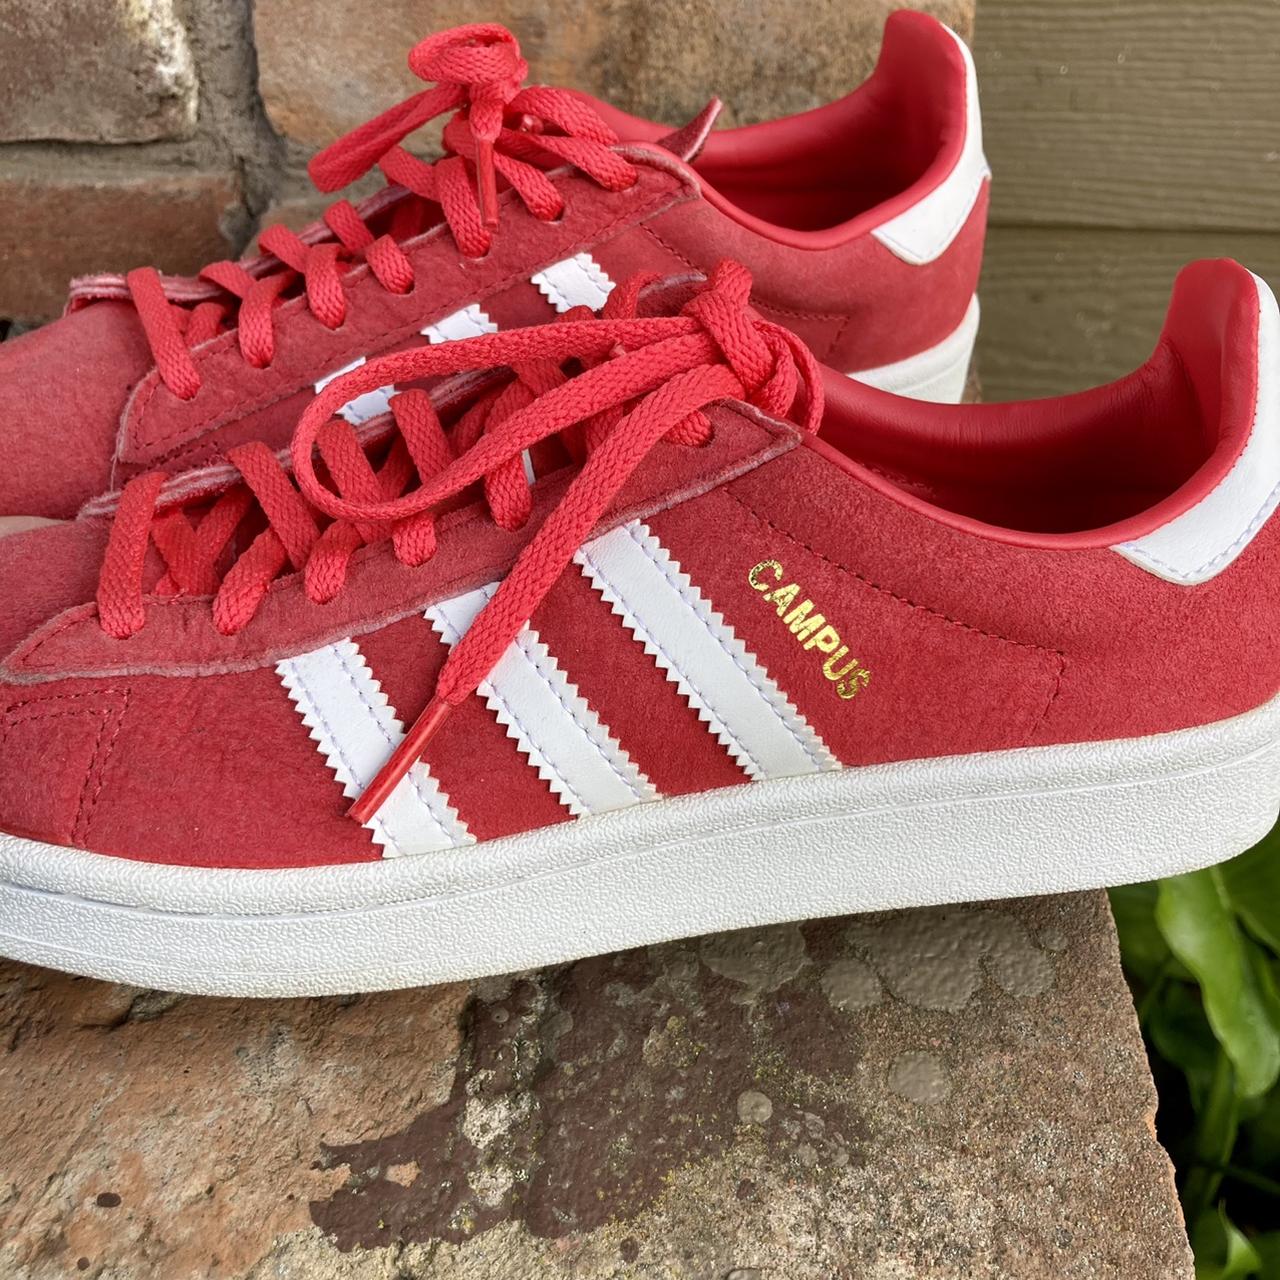 Product Image 2 - Cherry red campus kicks. Tag